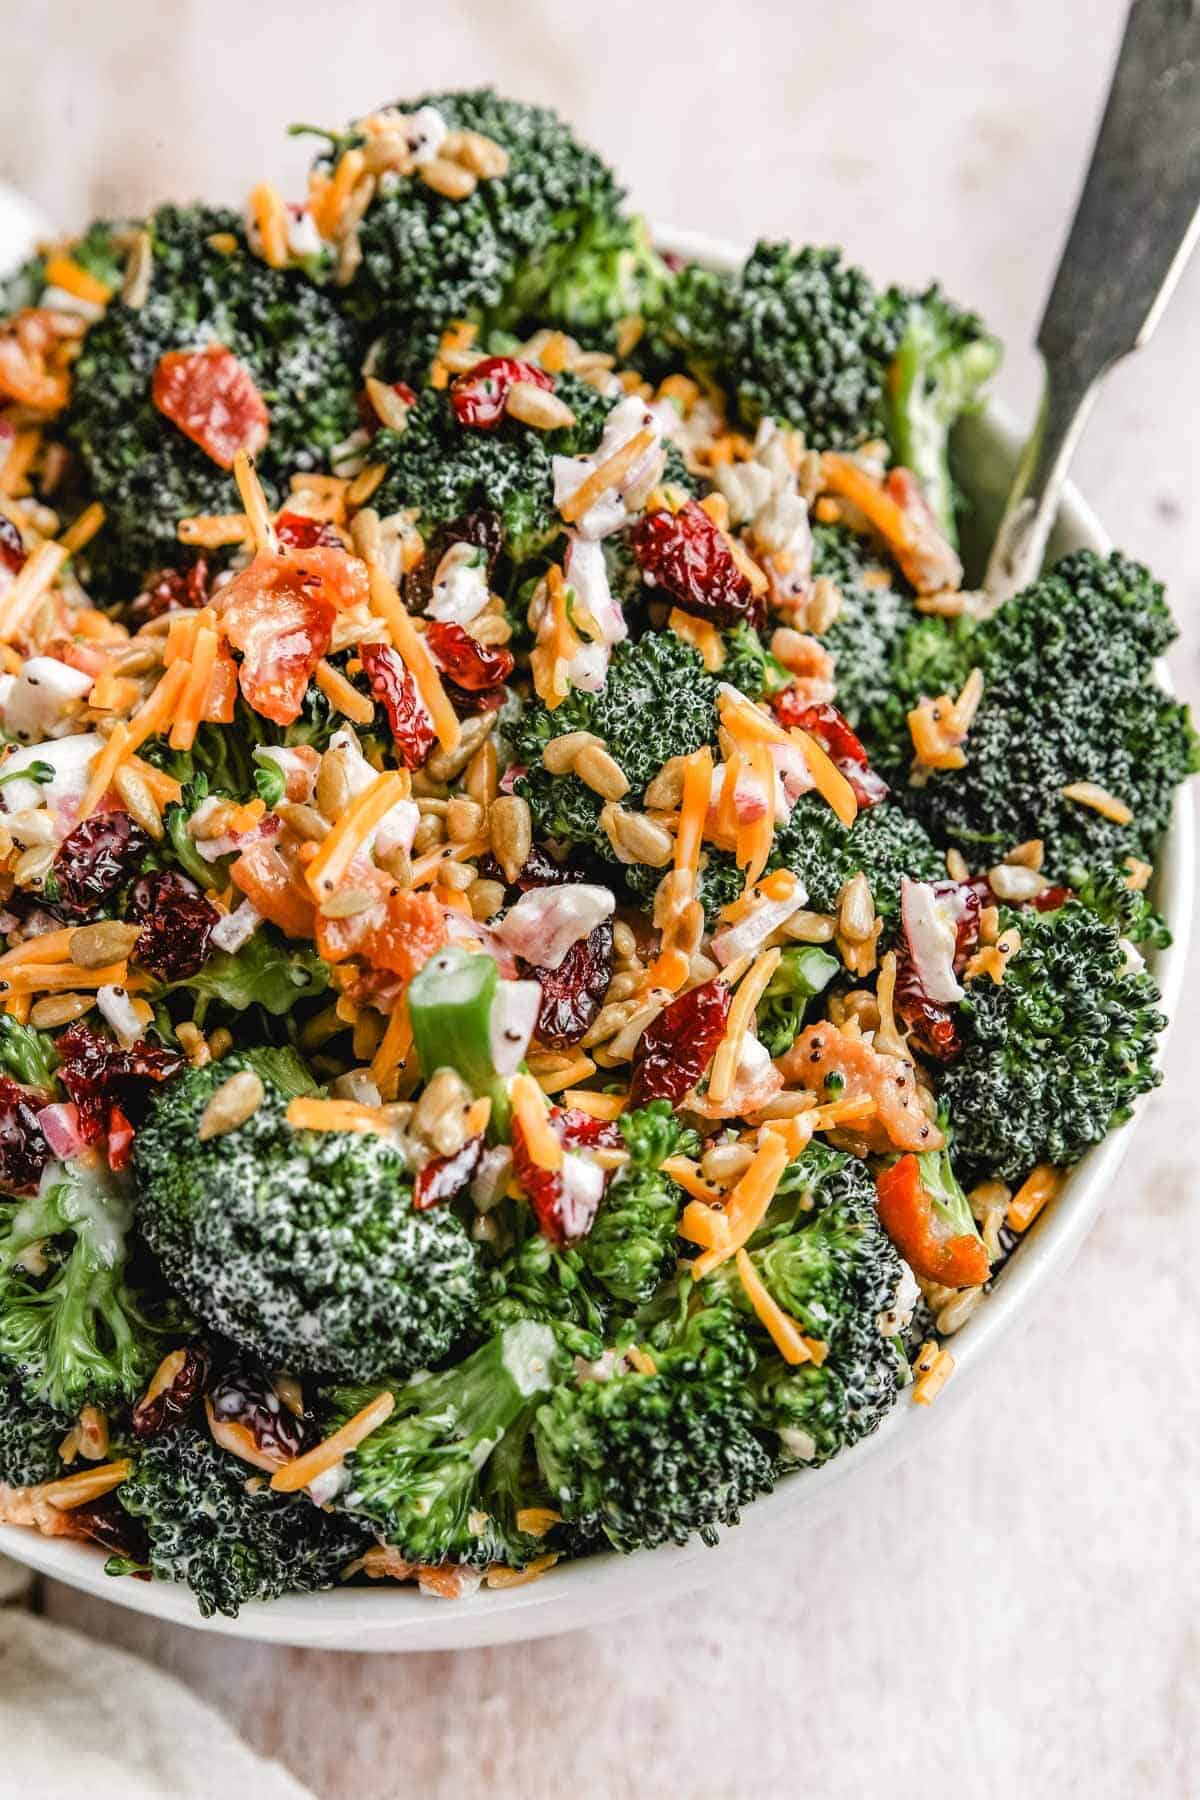 a close up photo of the creamy broccoli salad in a large serving bowl